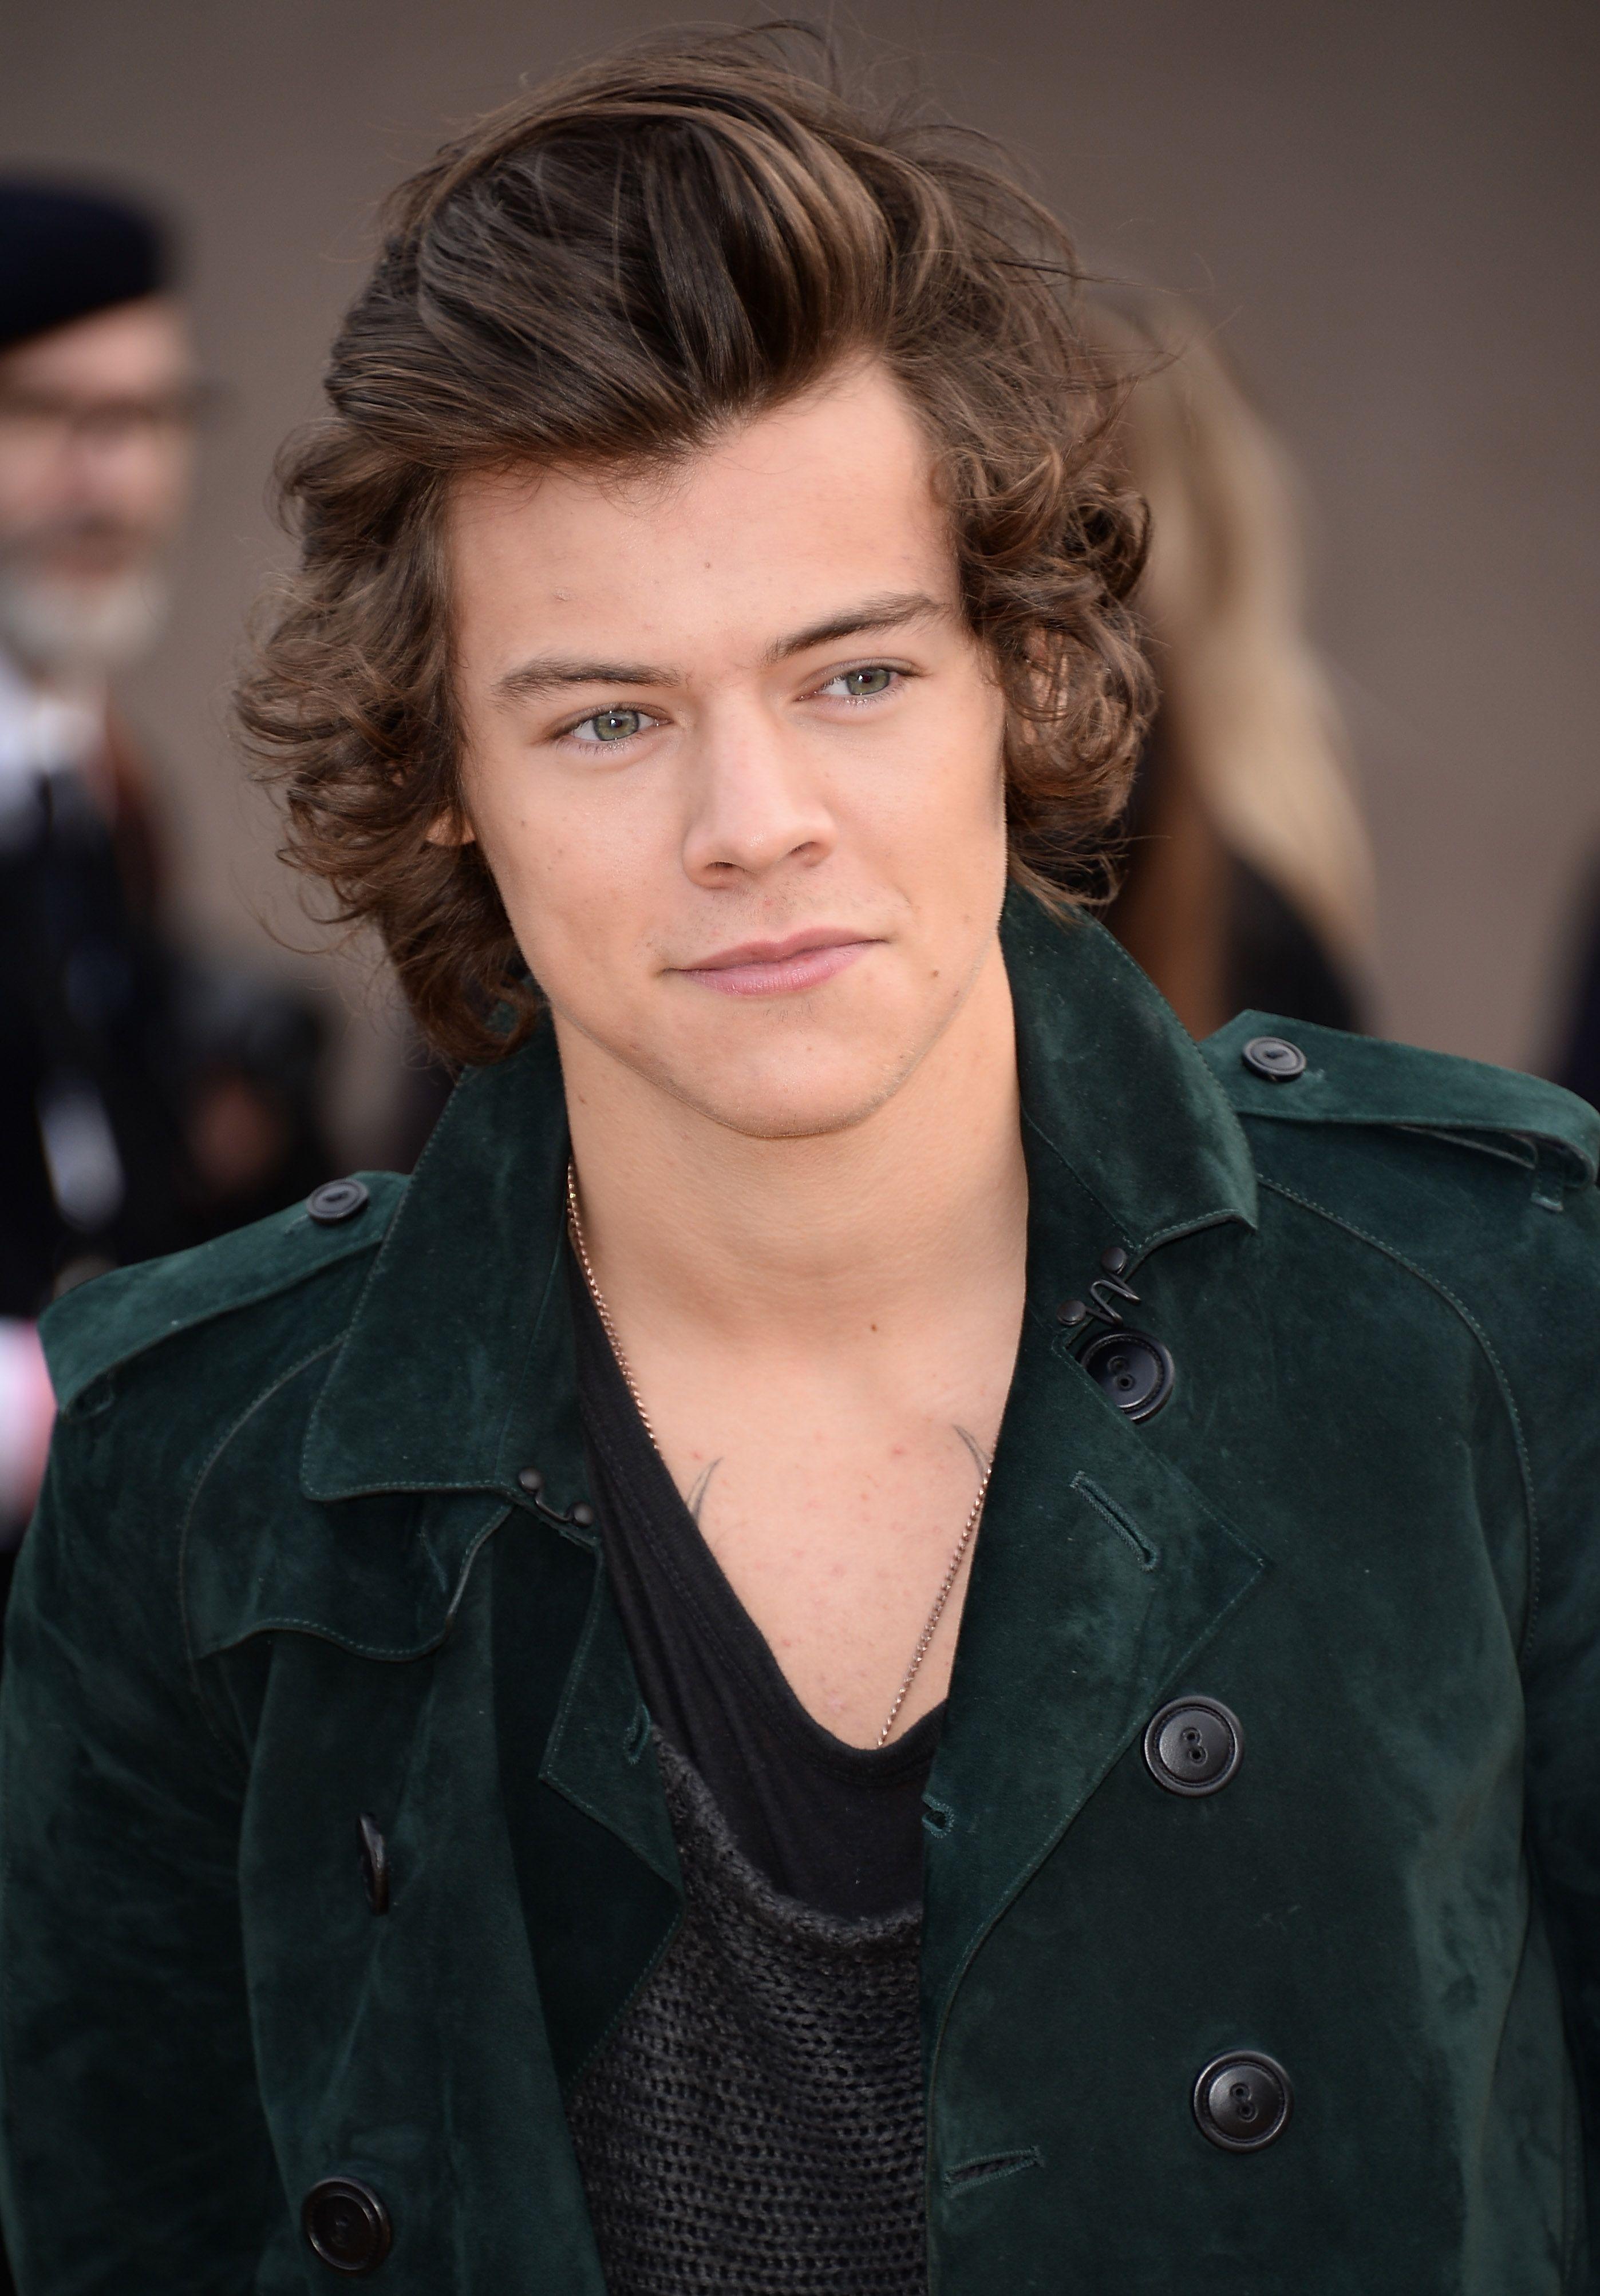 The Harry Styles Shirtless & Nearly Nude Photo Superlatives You